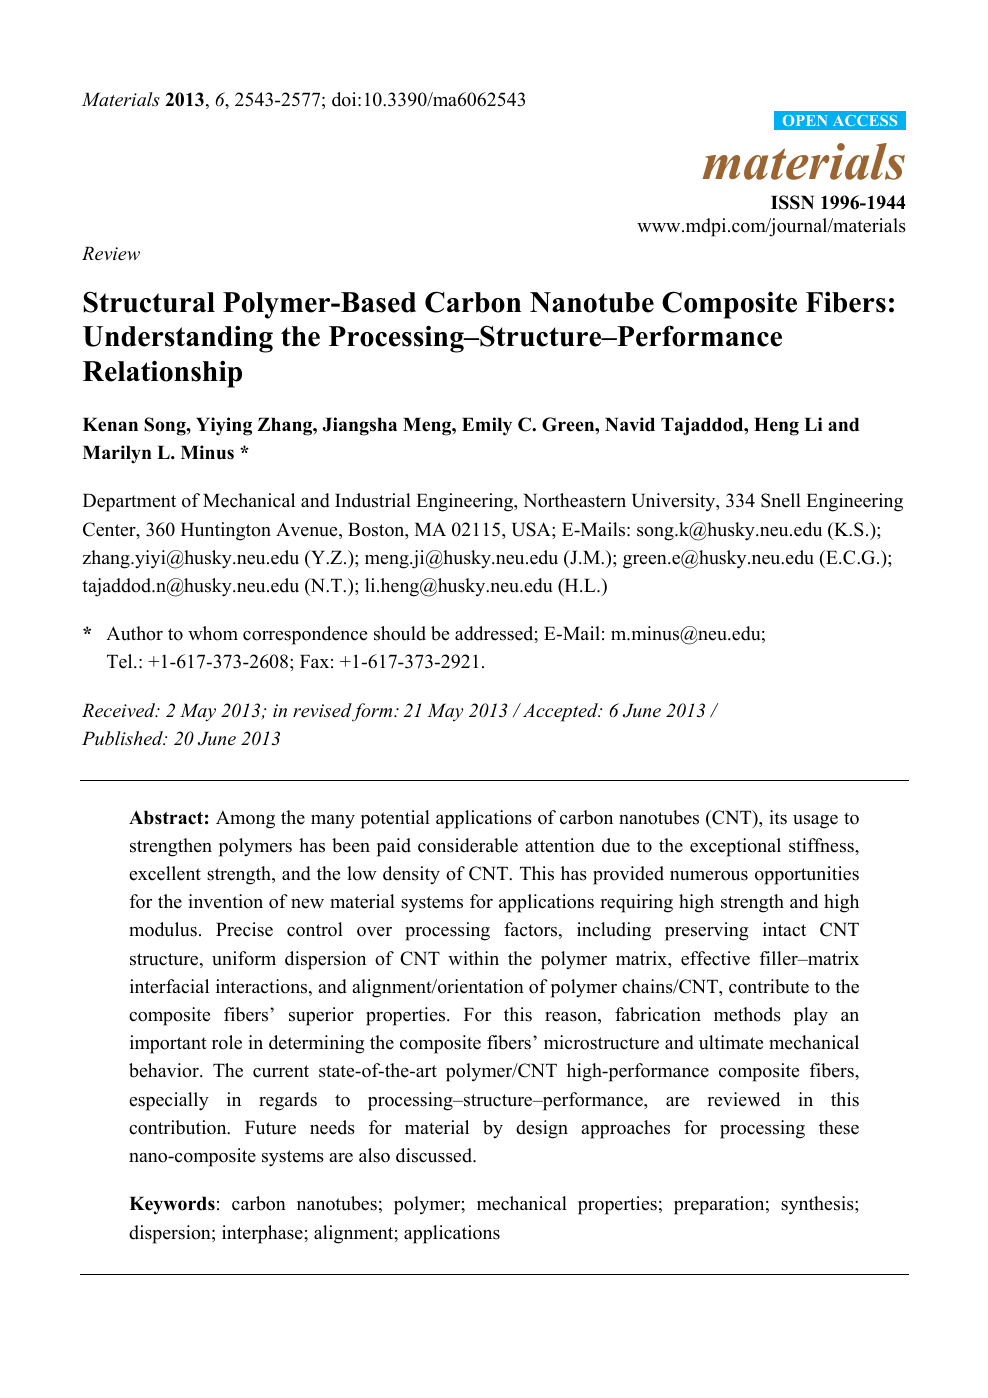 Structural Polymer Based Carbon Nanotube Composite Fibers Understanding The Processing Structure Performance Relationship Topic Of Research Paper In Materials Engineering Download Scholarly Article Pdf And Read For Free On Cyberleninka Open Science